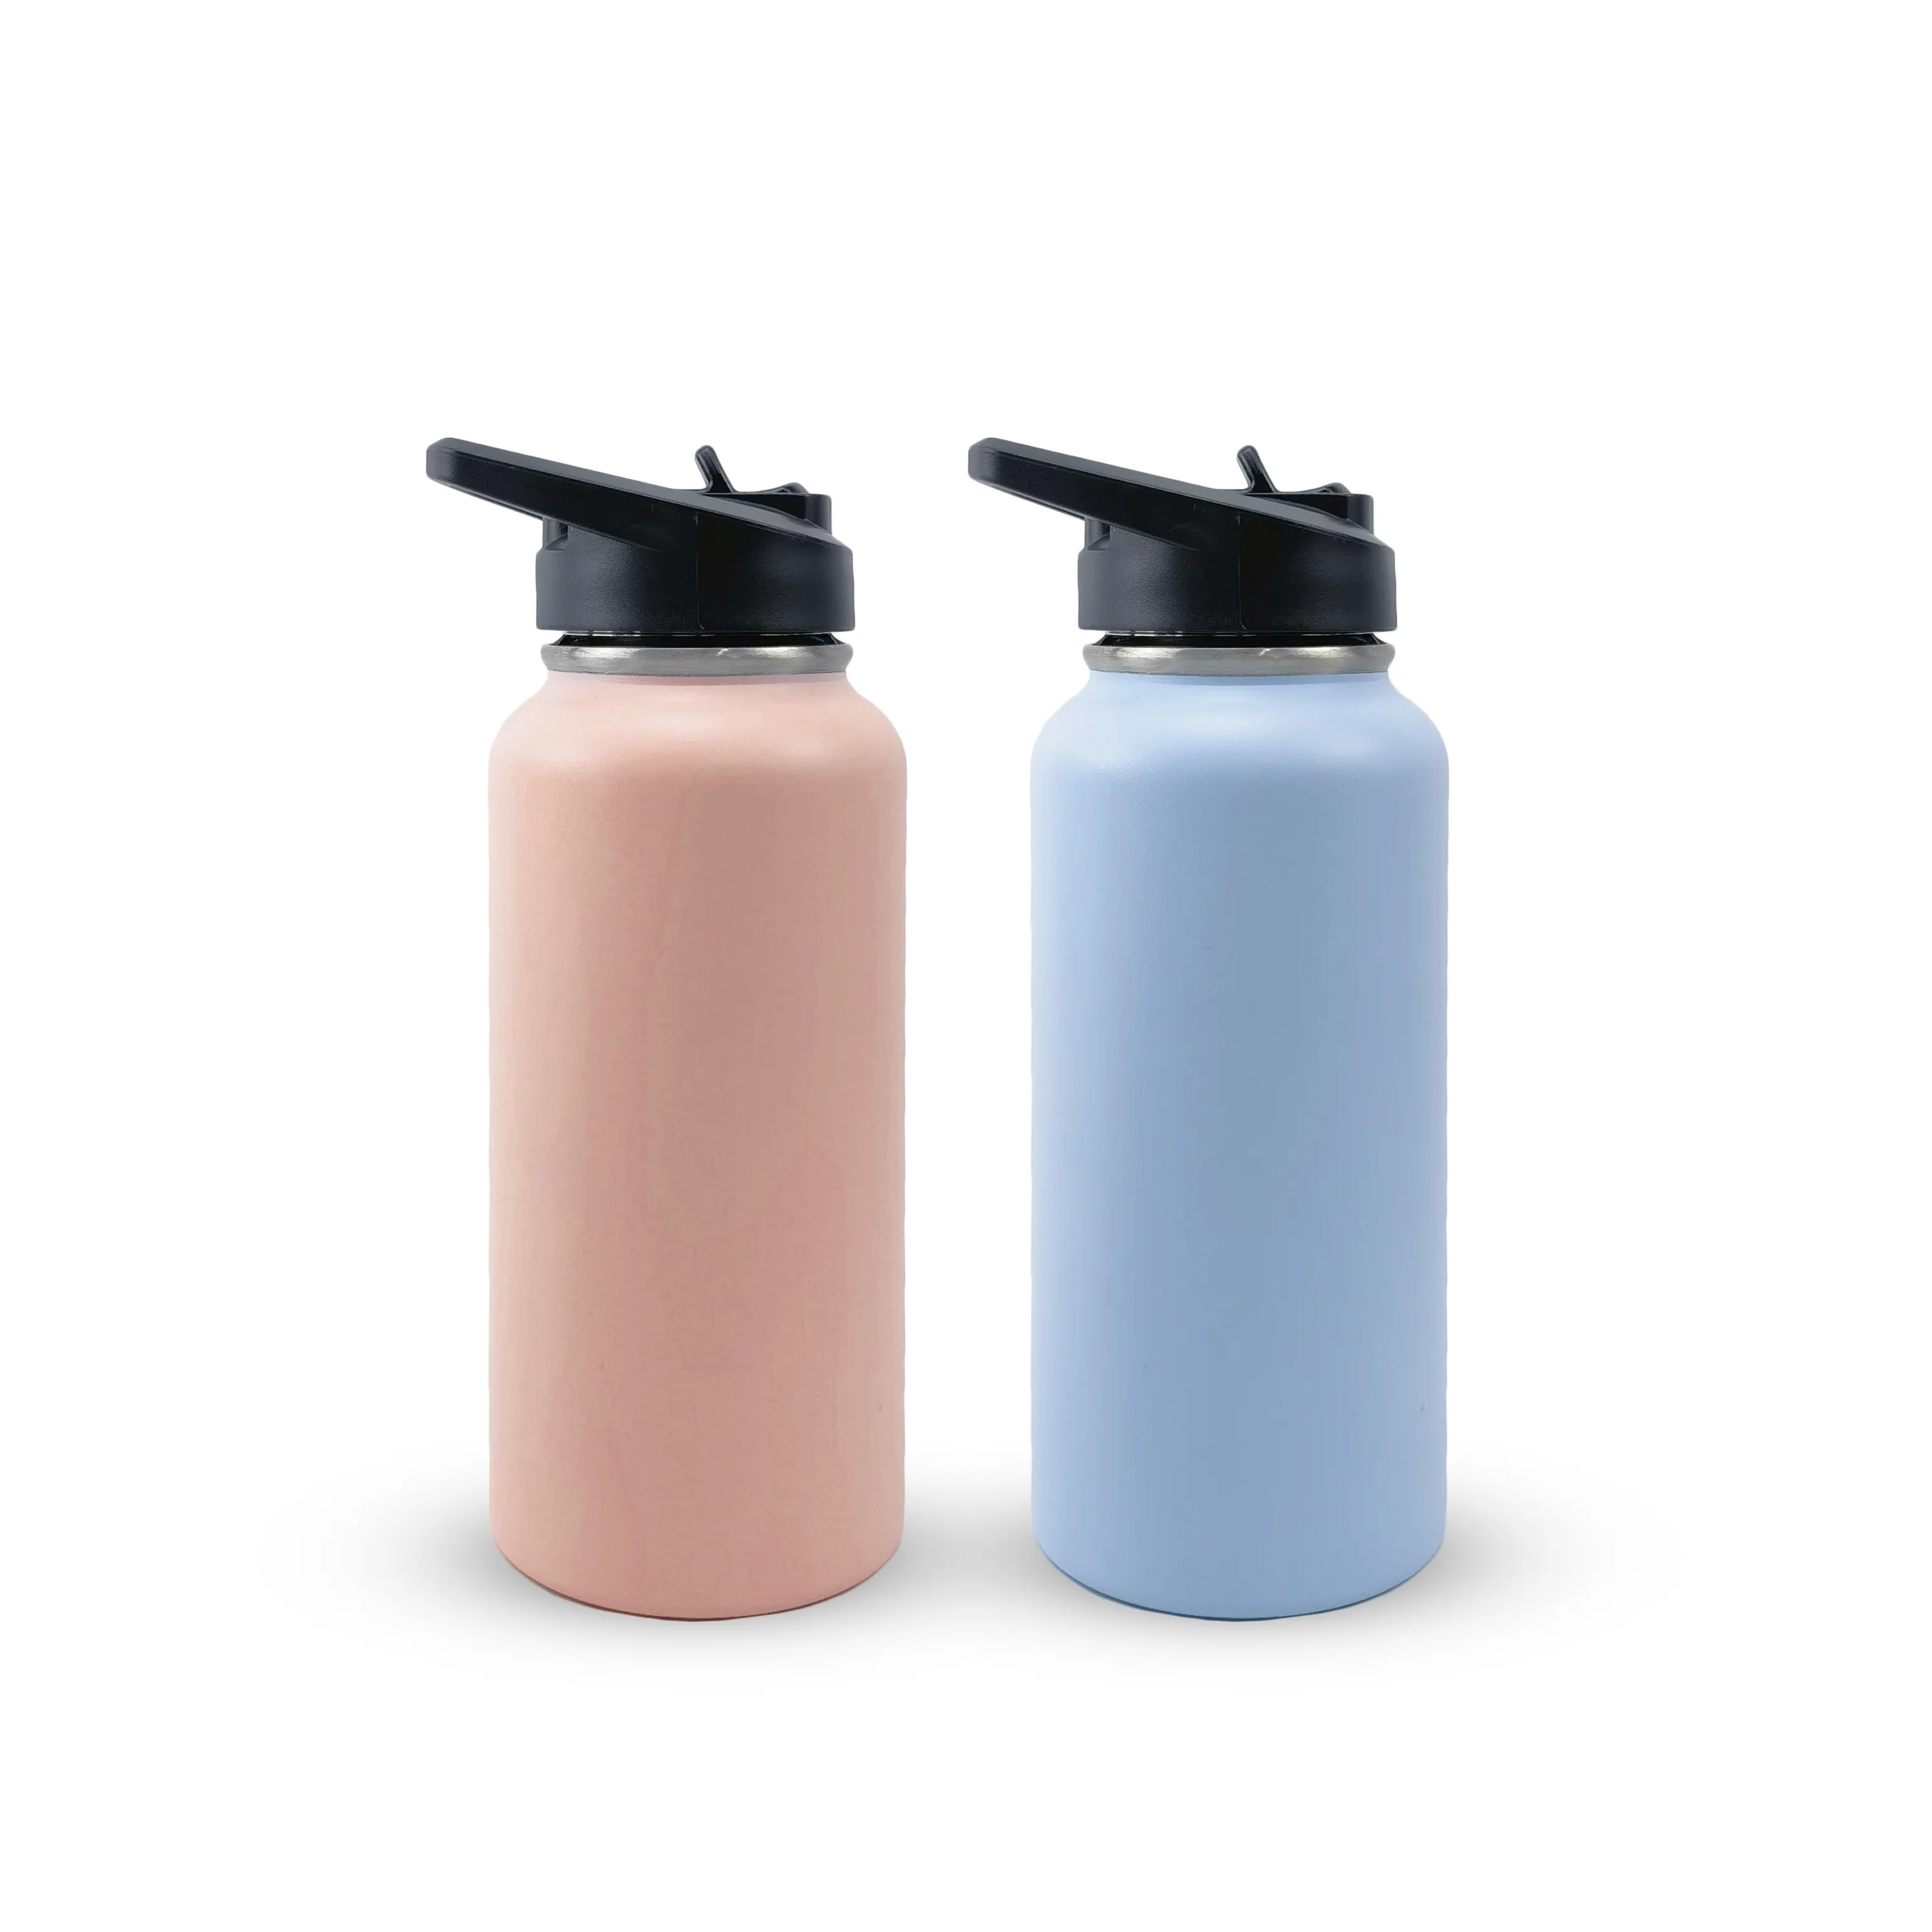 32 oz Thermal Water Bottle Double Wall Wide Mouth With Lid Insulated 18/8 Stainless Steel Water Bottle